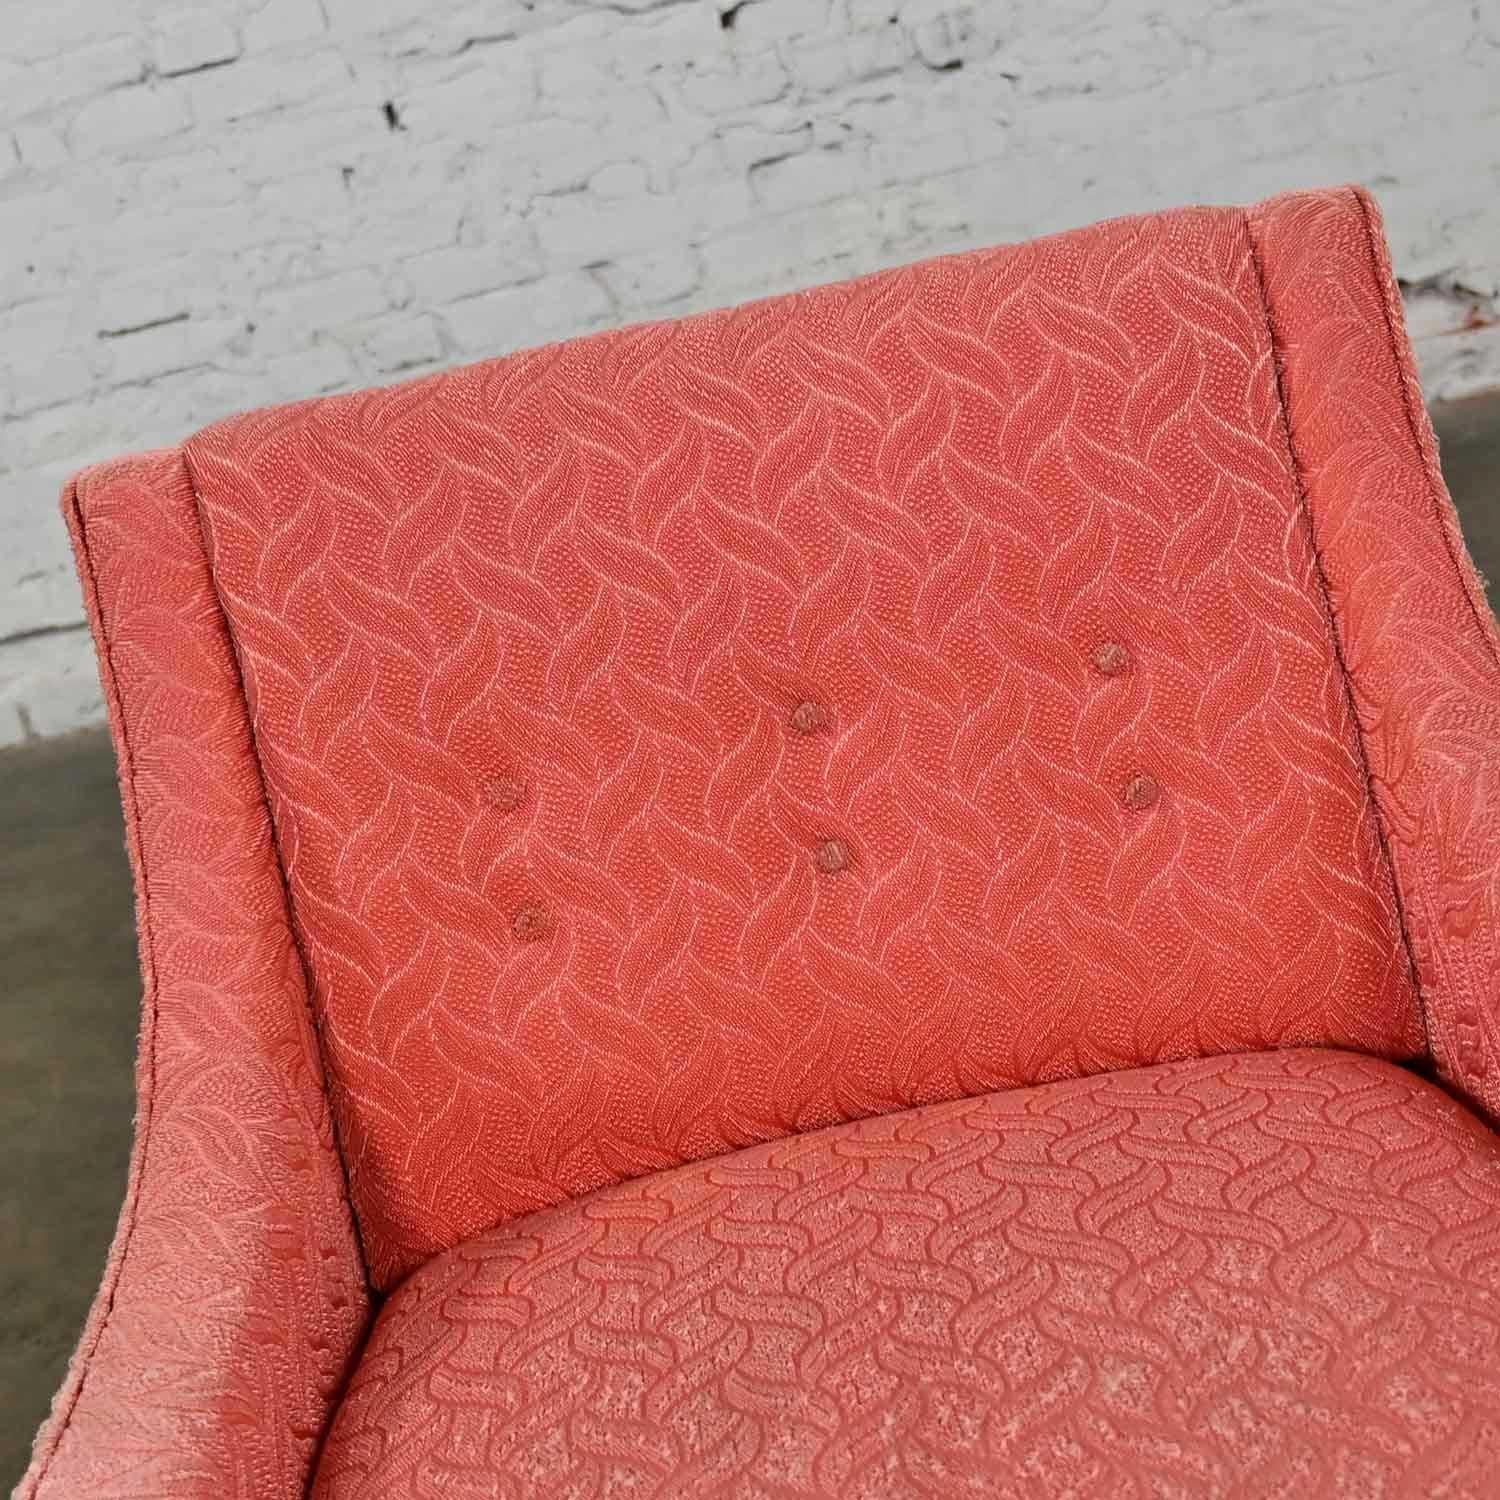 Vintage Mid-Century Modern Coral Frieze Upholstered Modified Slipper Chair For Sale 9